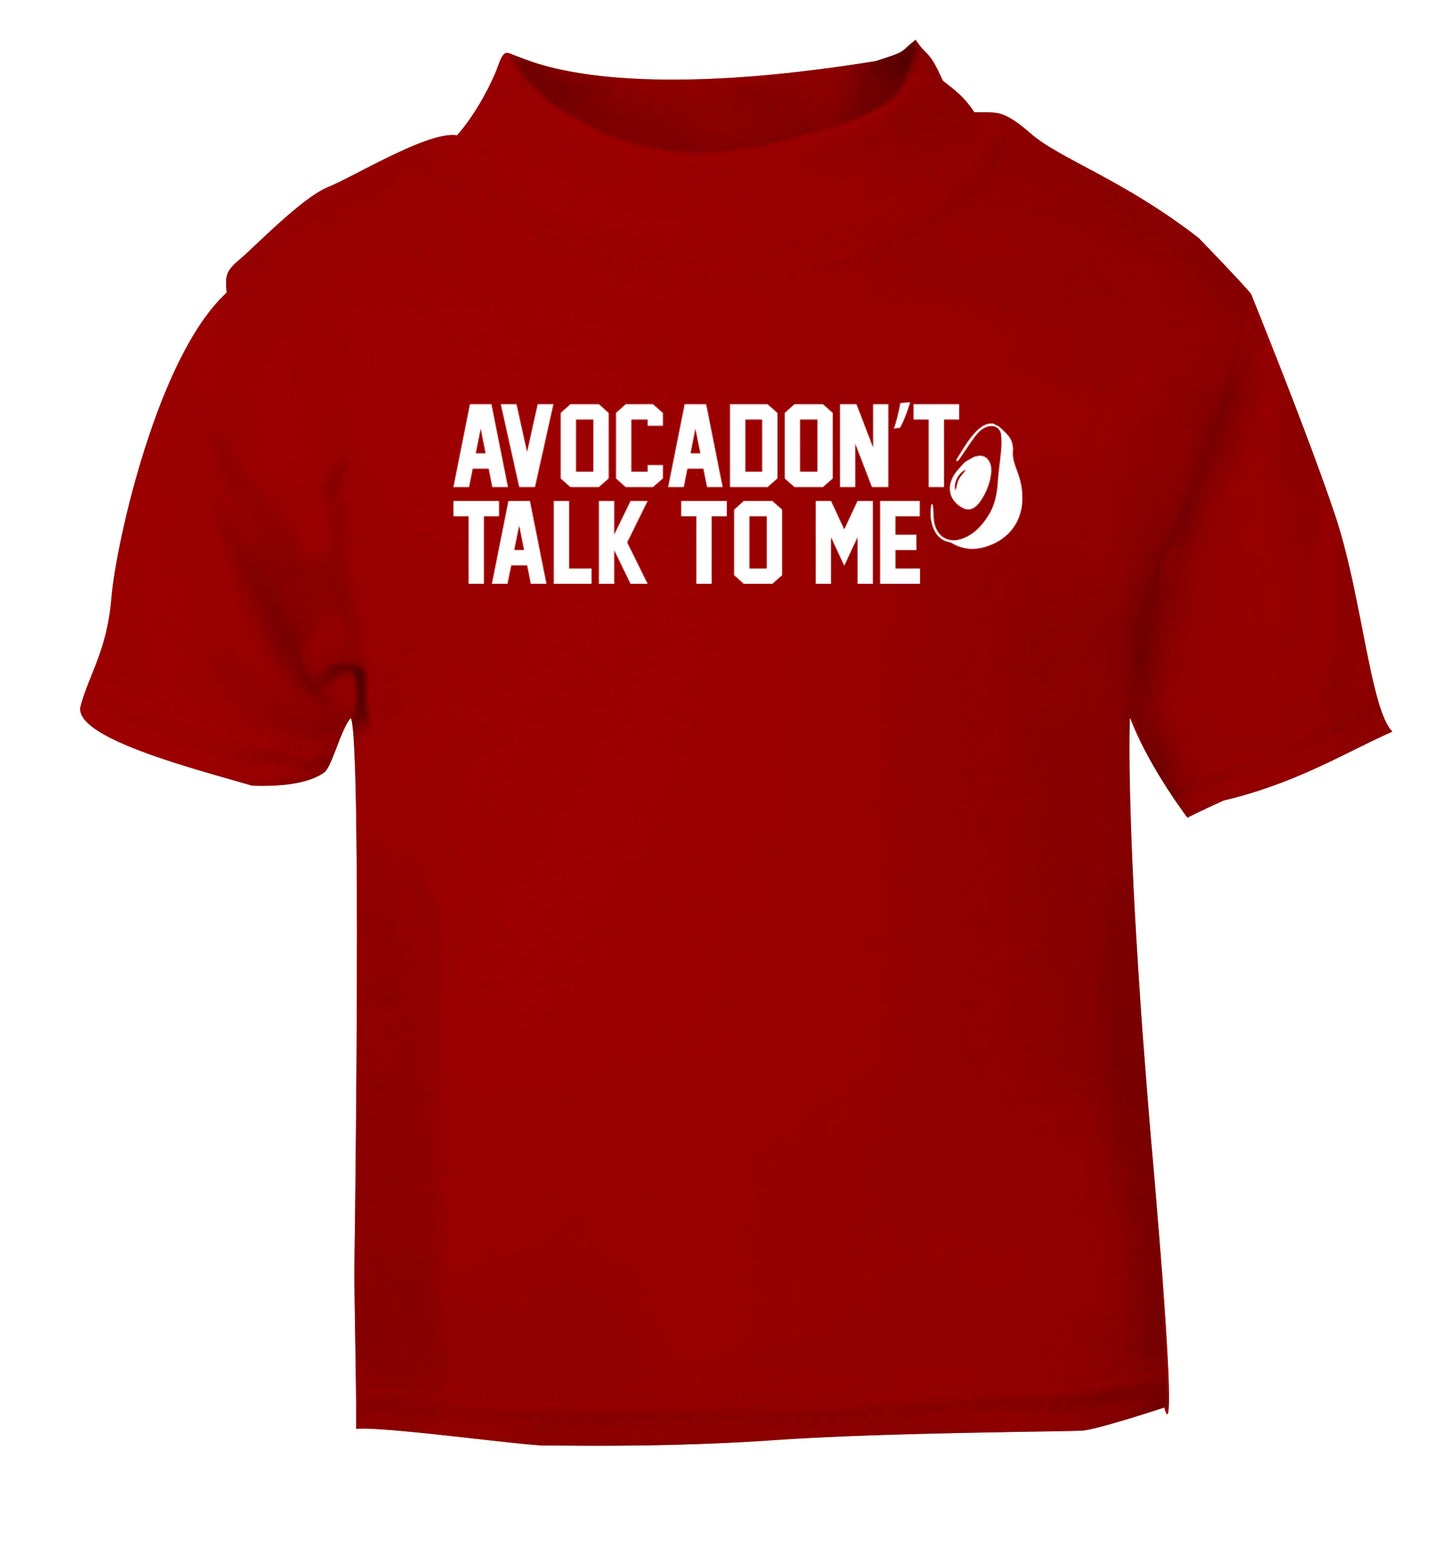 Avocadon't talk to me red Baby Toddler Tshirt 2 Years